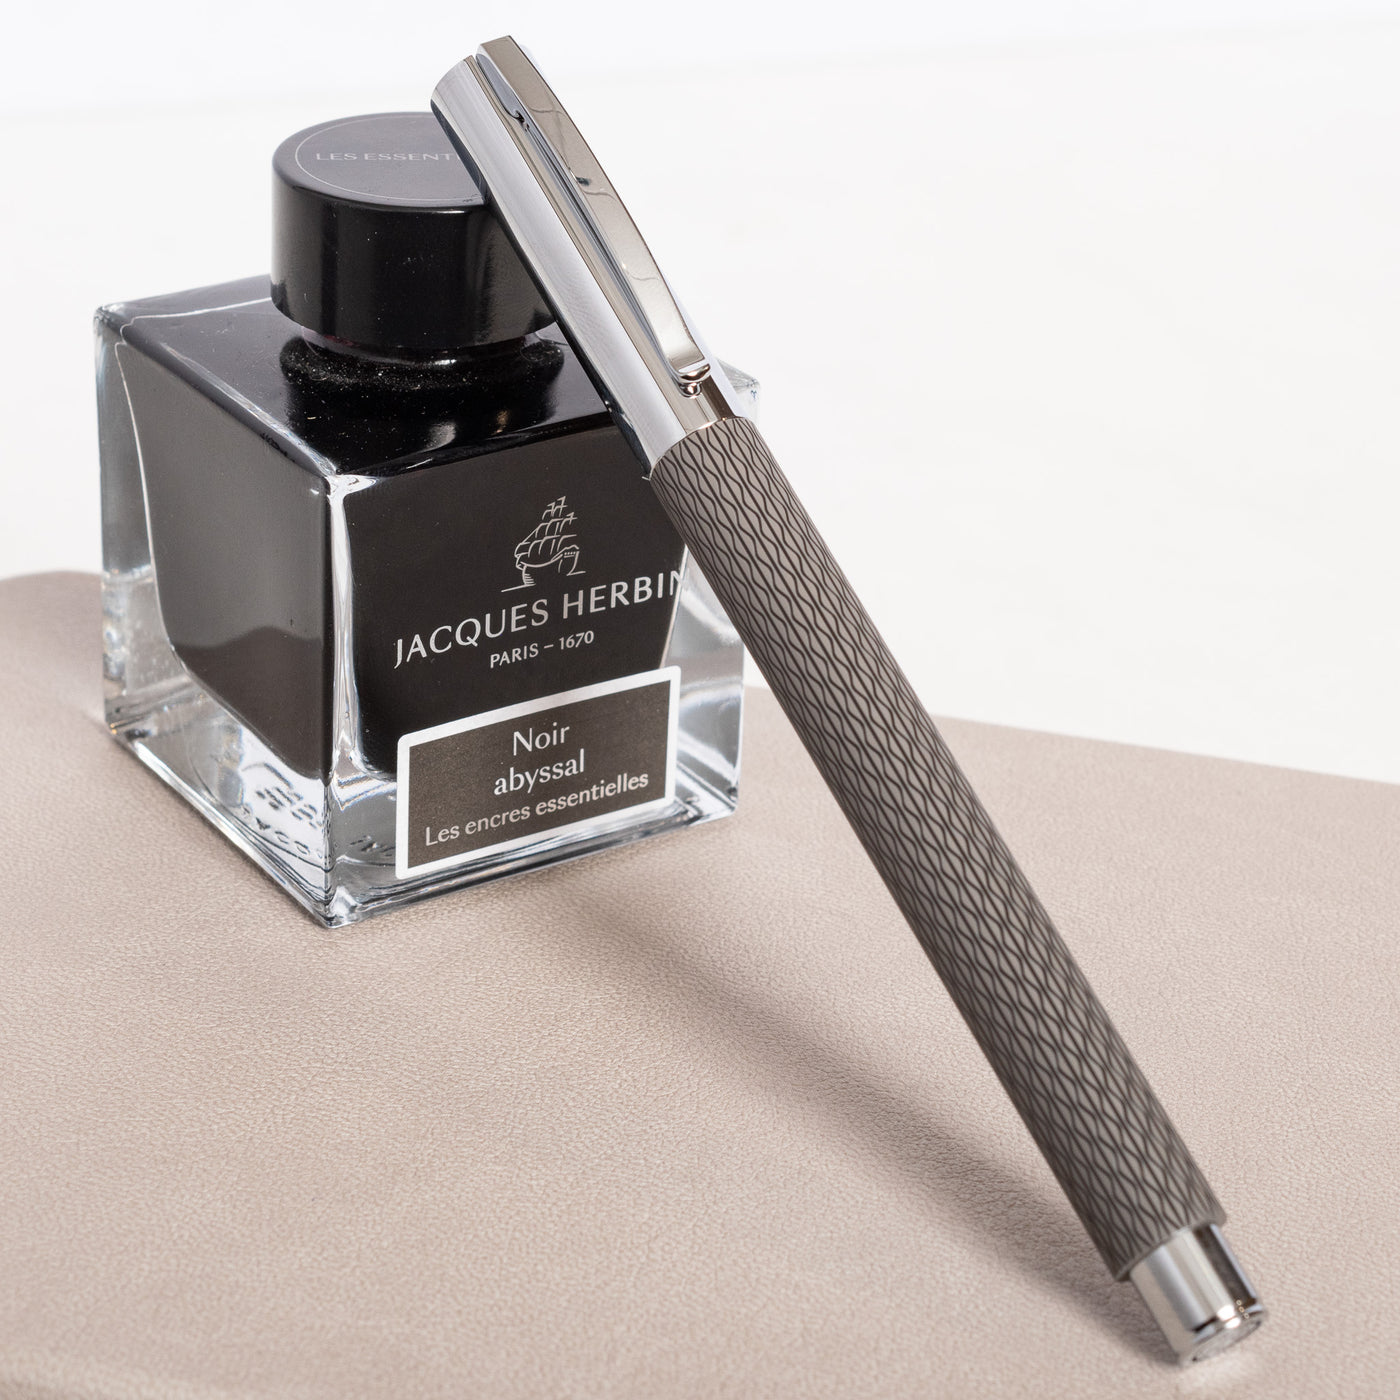 Faber-Castell Ambition OpArt Black Sand Fountain Pen capped